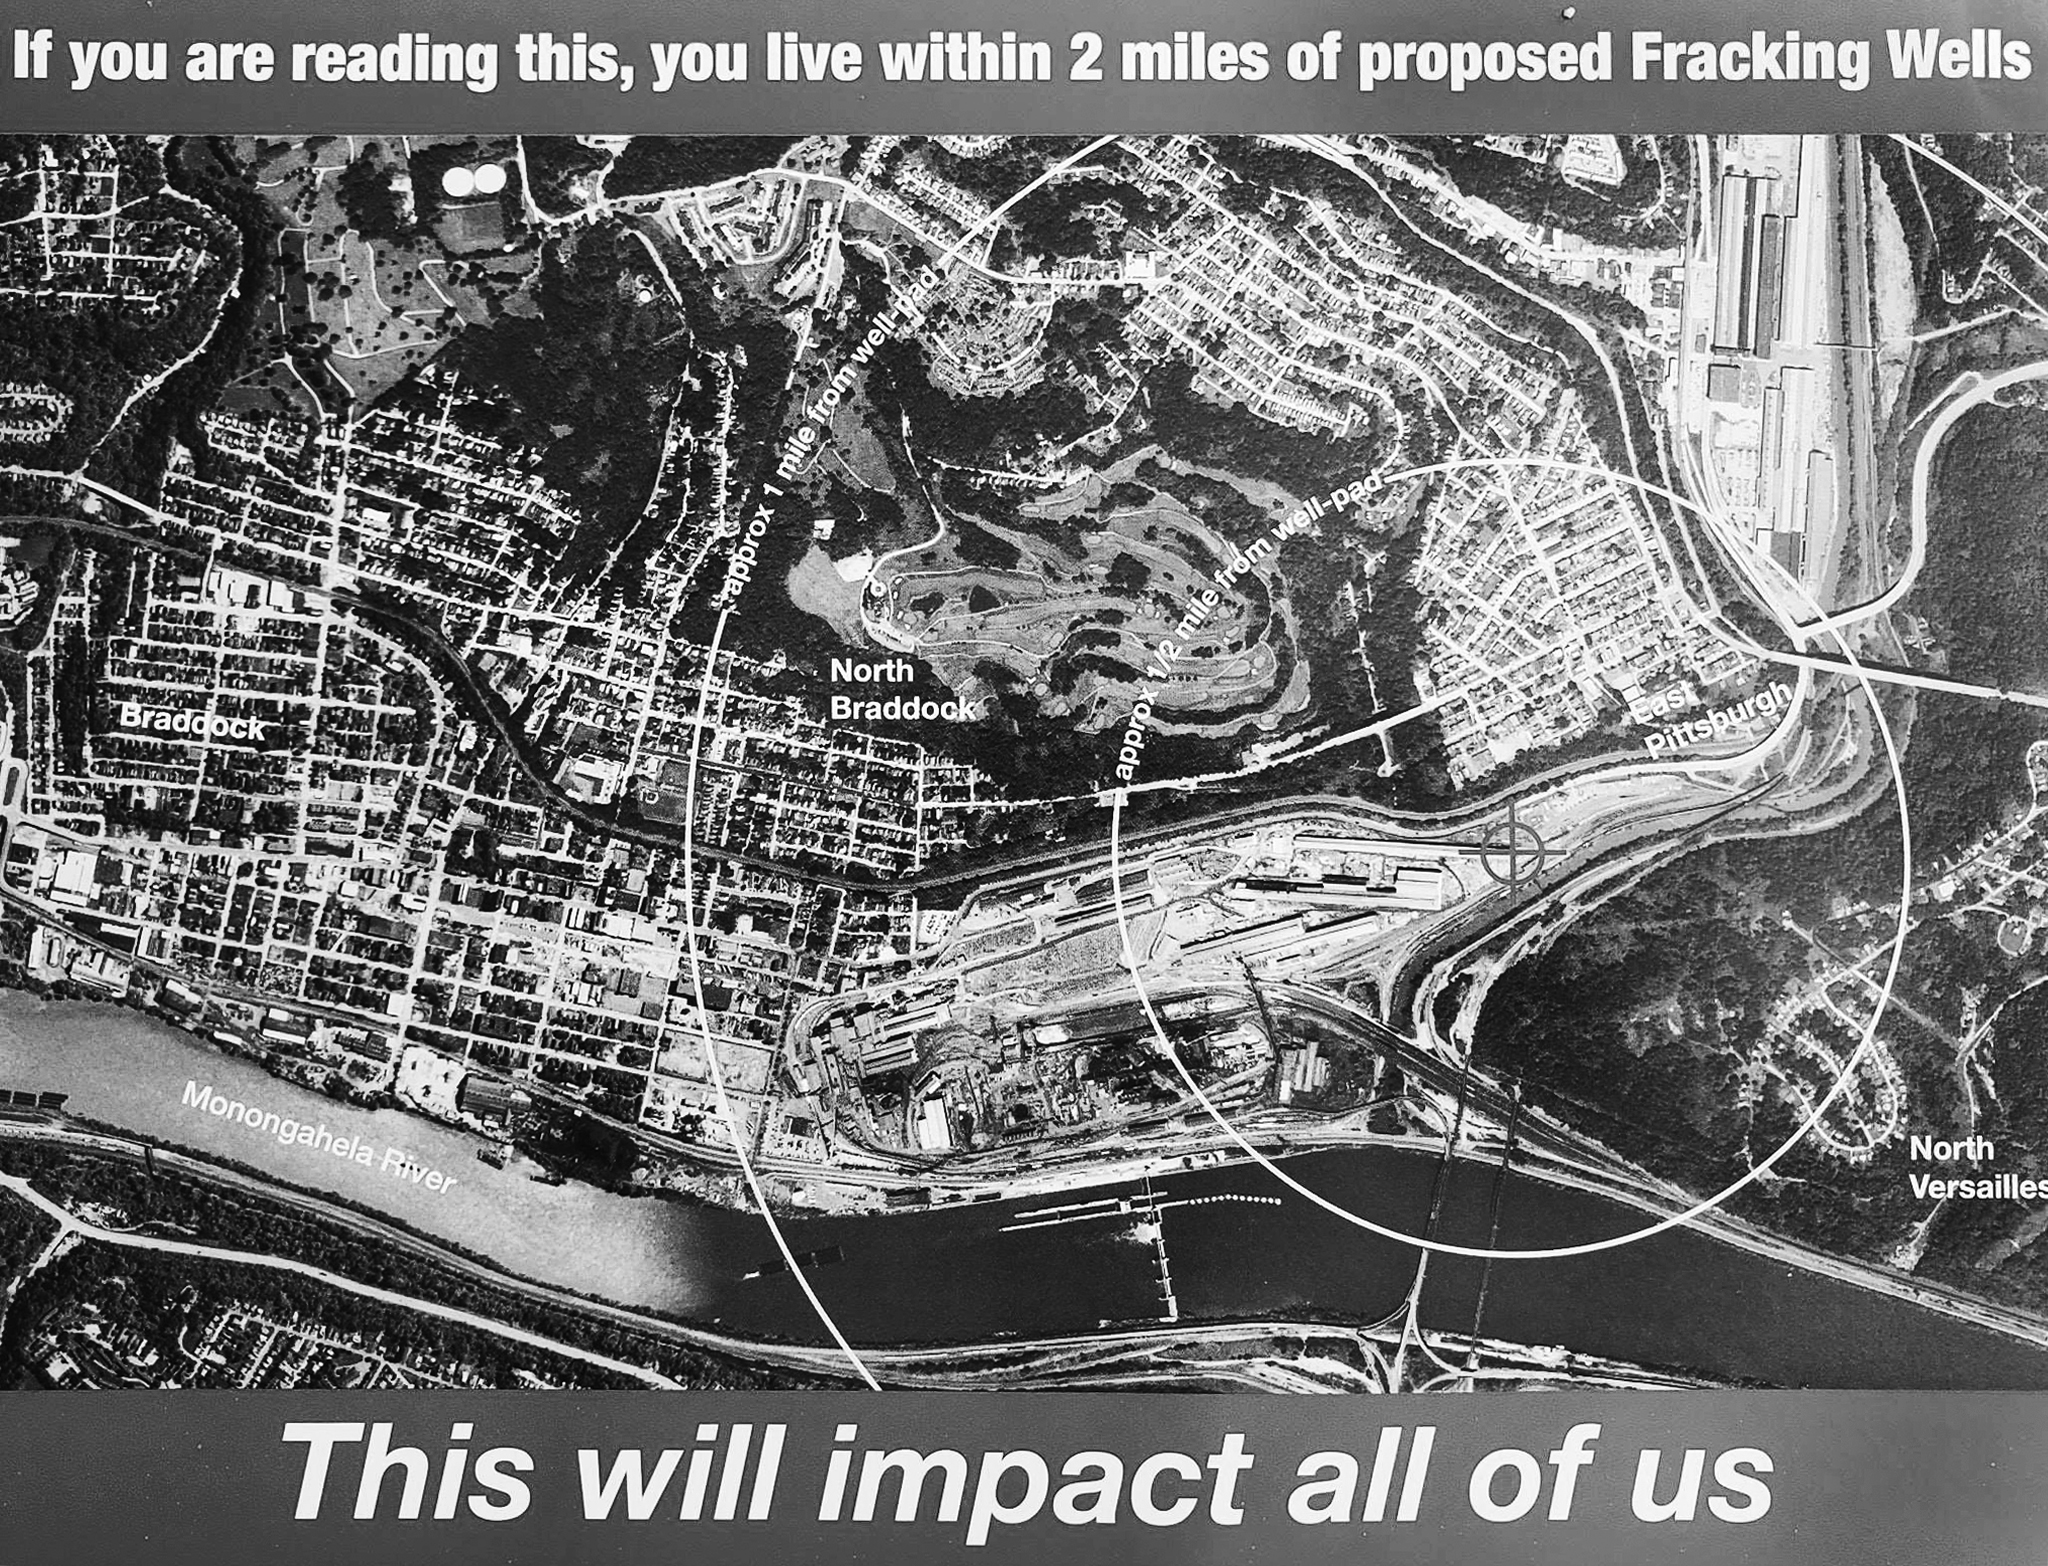 Anti-fracking campaign poster produced by the North Braddock Residents For Our Futures